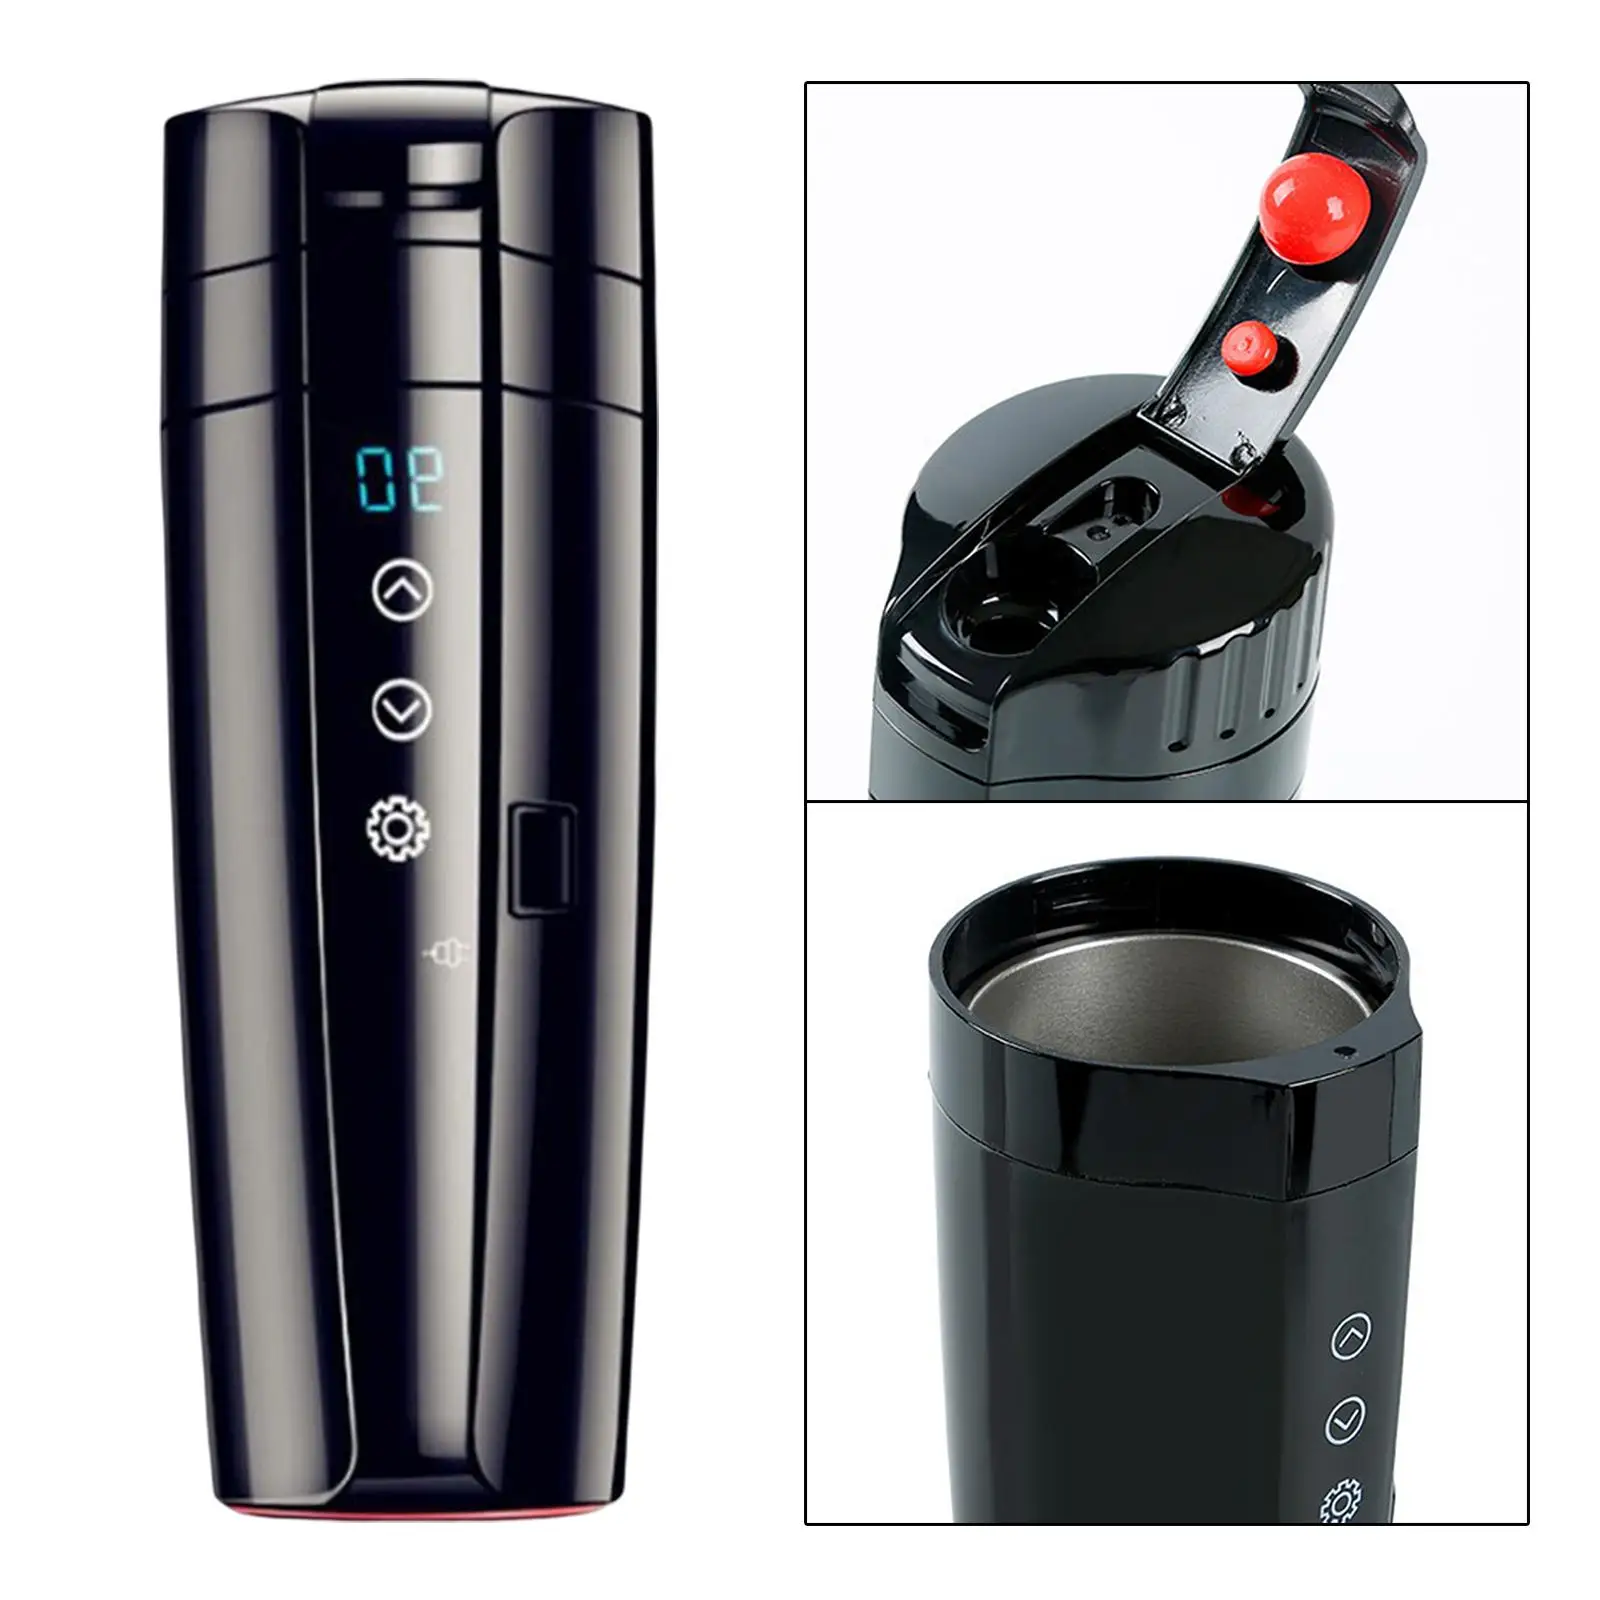 400ml Car Heating Cup Smart Temperature Control LCD Display Leakproof Heated Travel Mug Thermal Mug for Drinking